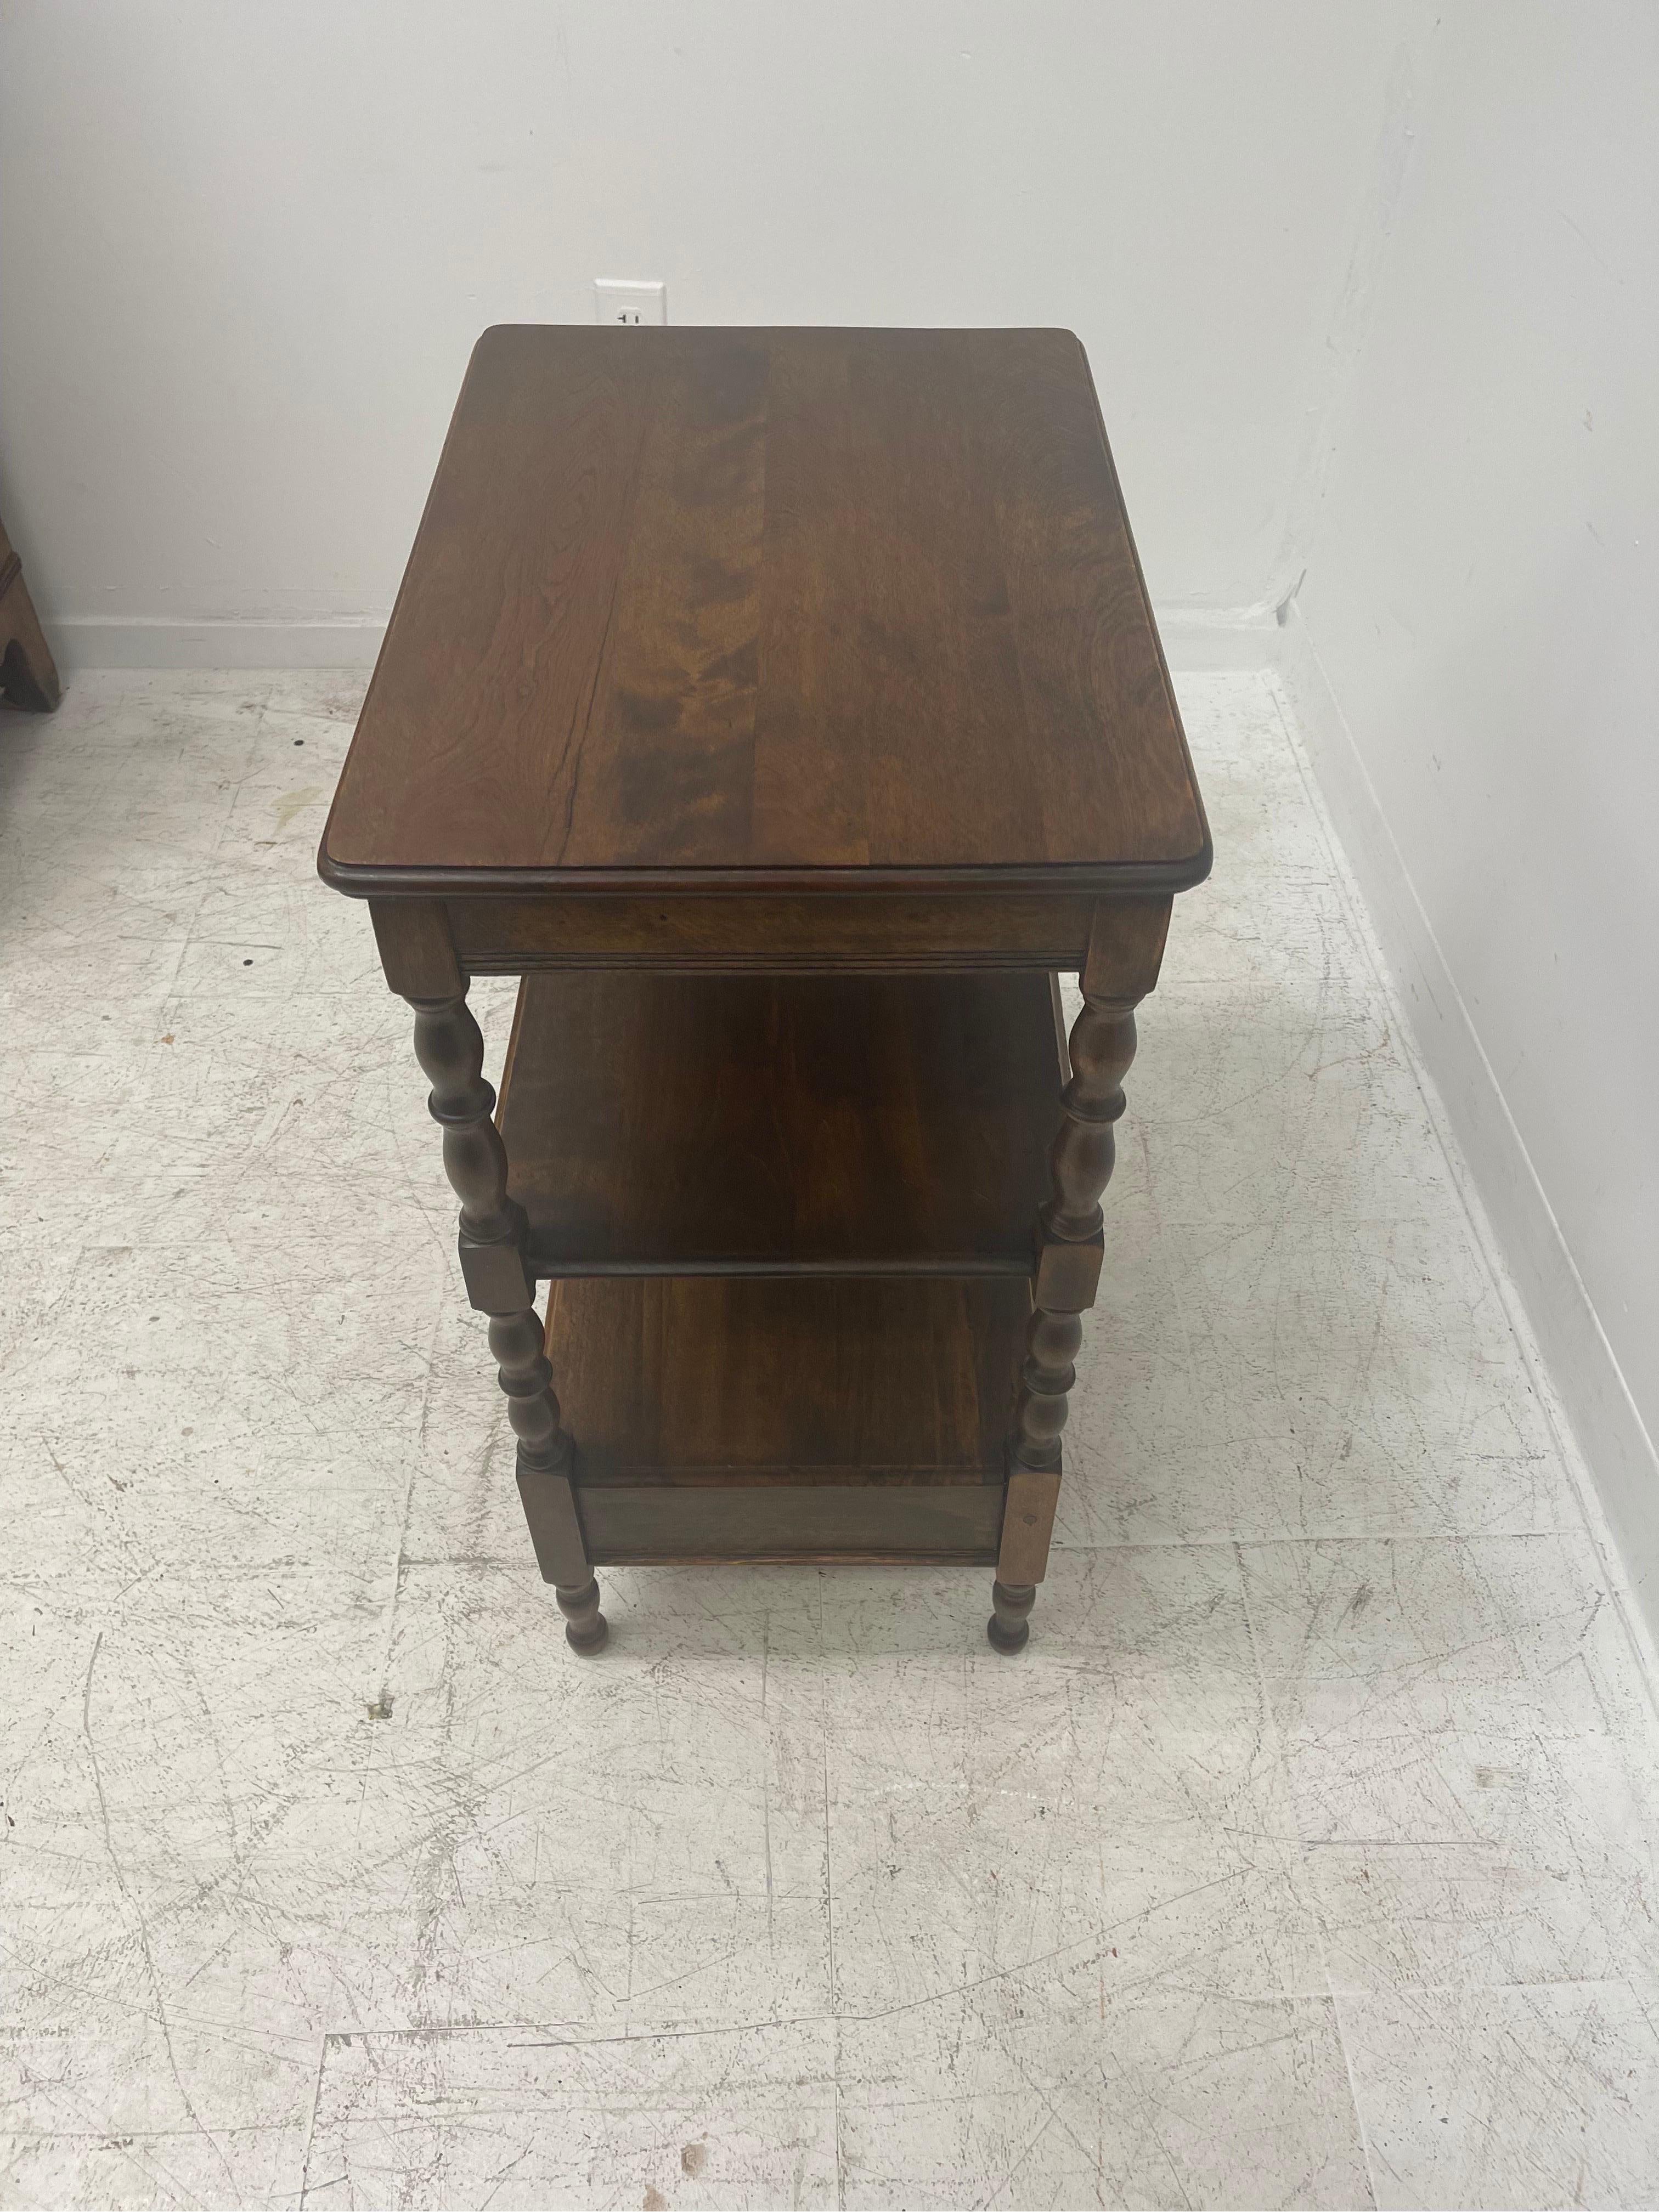 Mid-20th Century Vintage English Mahogany Side Table with Dovetailed Drawers